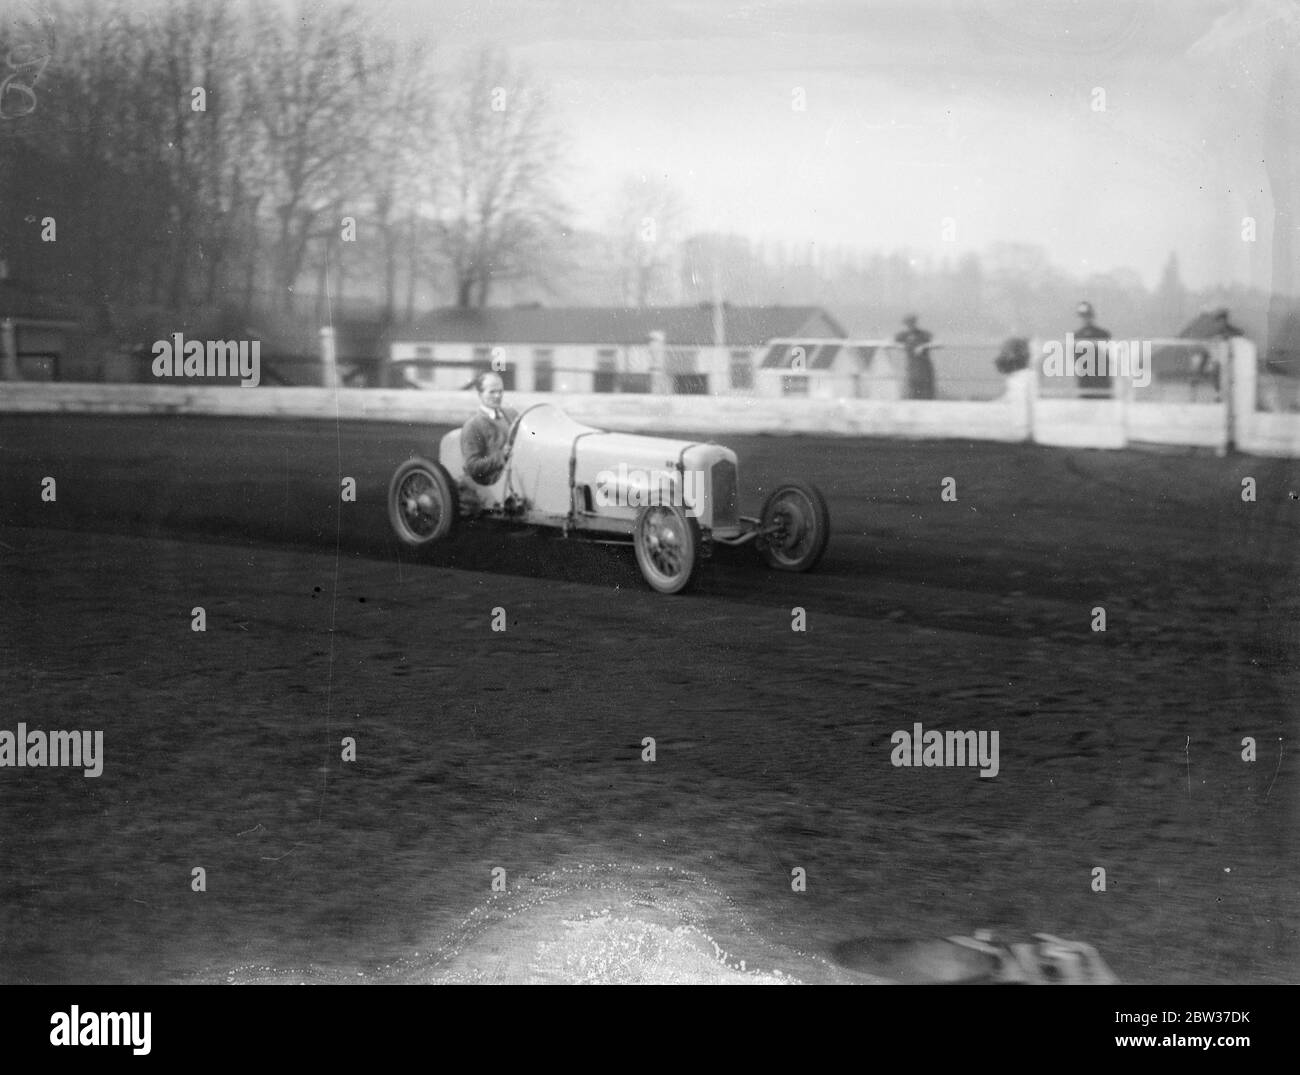 Famous drivers to set up new record for 1500 cc cars at Crystal Palace on Saturday . Mr R G J Nash , the famous hill climbing exponent , in a special super charged Anzani Nash car , is to establish a new land record for cars of the 1500 cc class , on the Crystal Palace speedway track , on Saturday . At preset their is no lap record for cars of this class . Photos show , Mr R G J Nash in his super charged Anzani Nash car , at speed during practice for the record at the Crystal Palace . 27 March 1934 Stock Photo